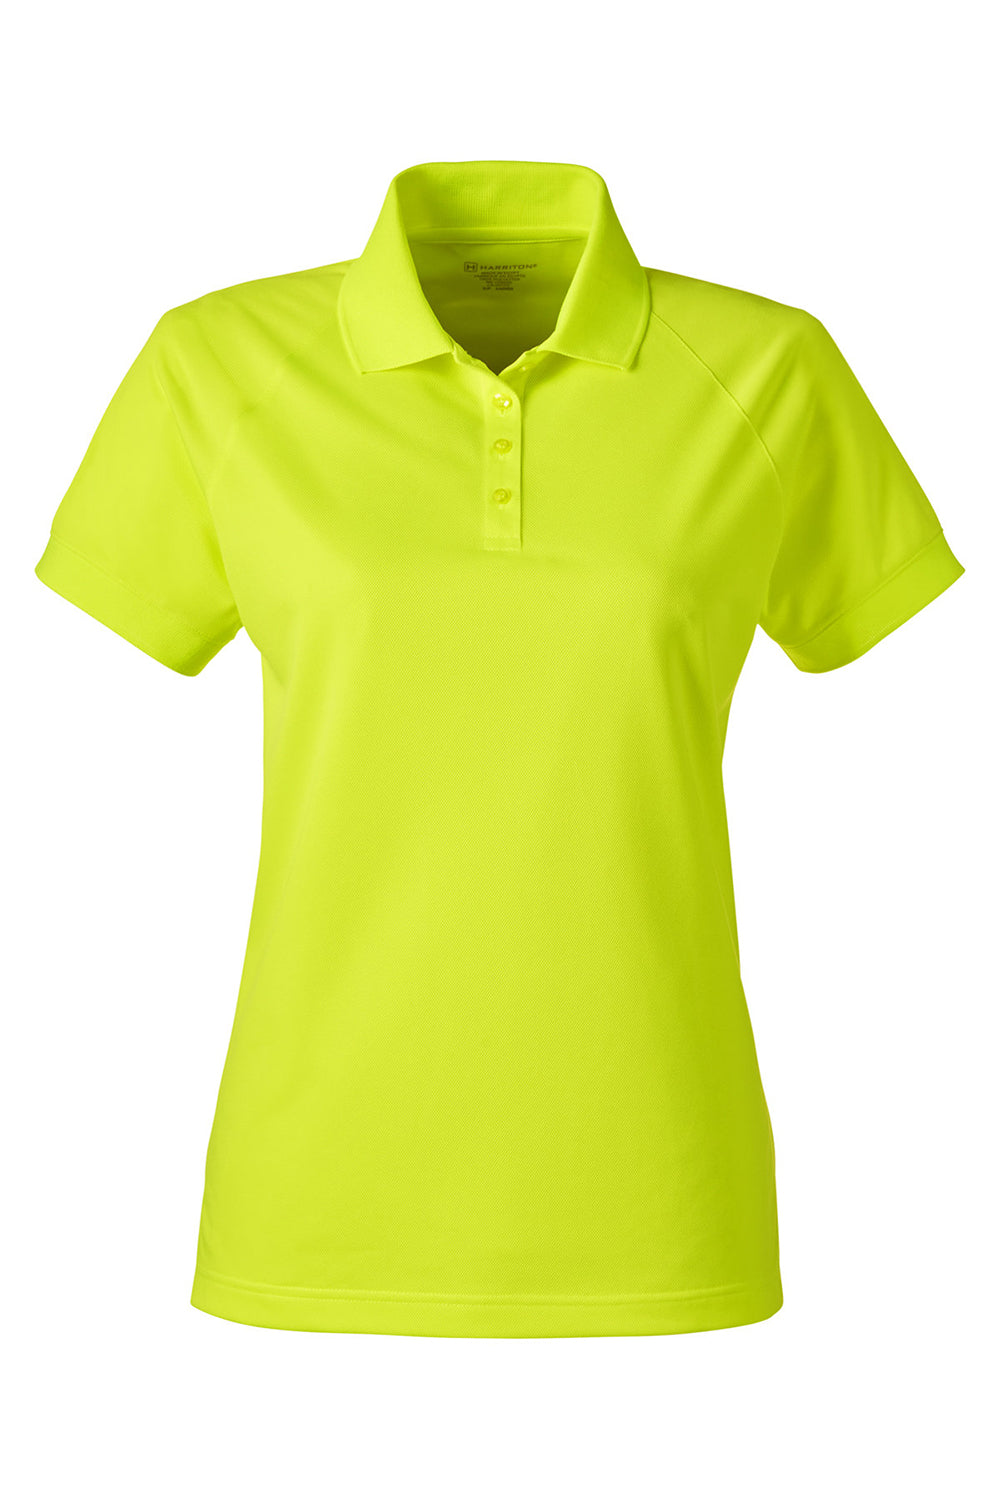 Harriton M208W Womens Charge Moisture Wicking Short Sleeve Polo Shirt Safety Yellow Flat Front